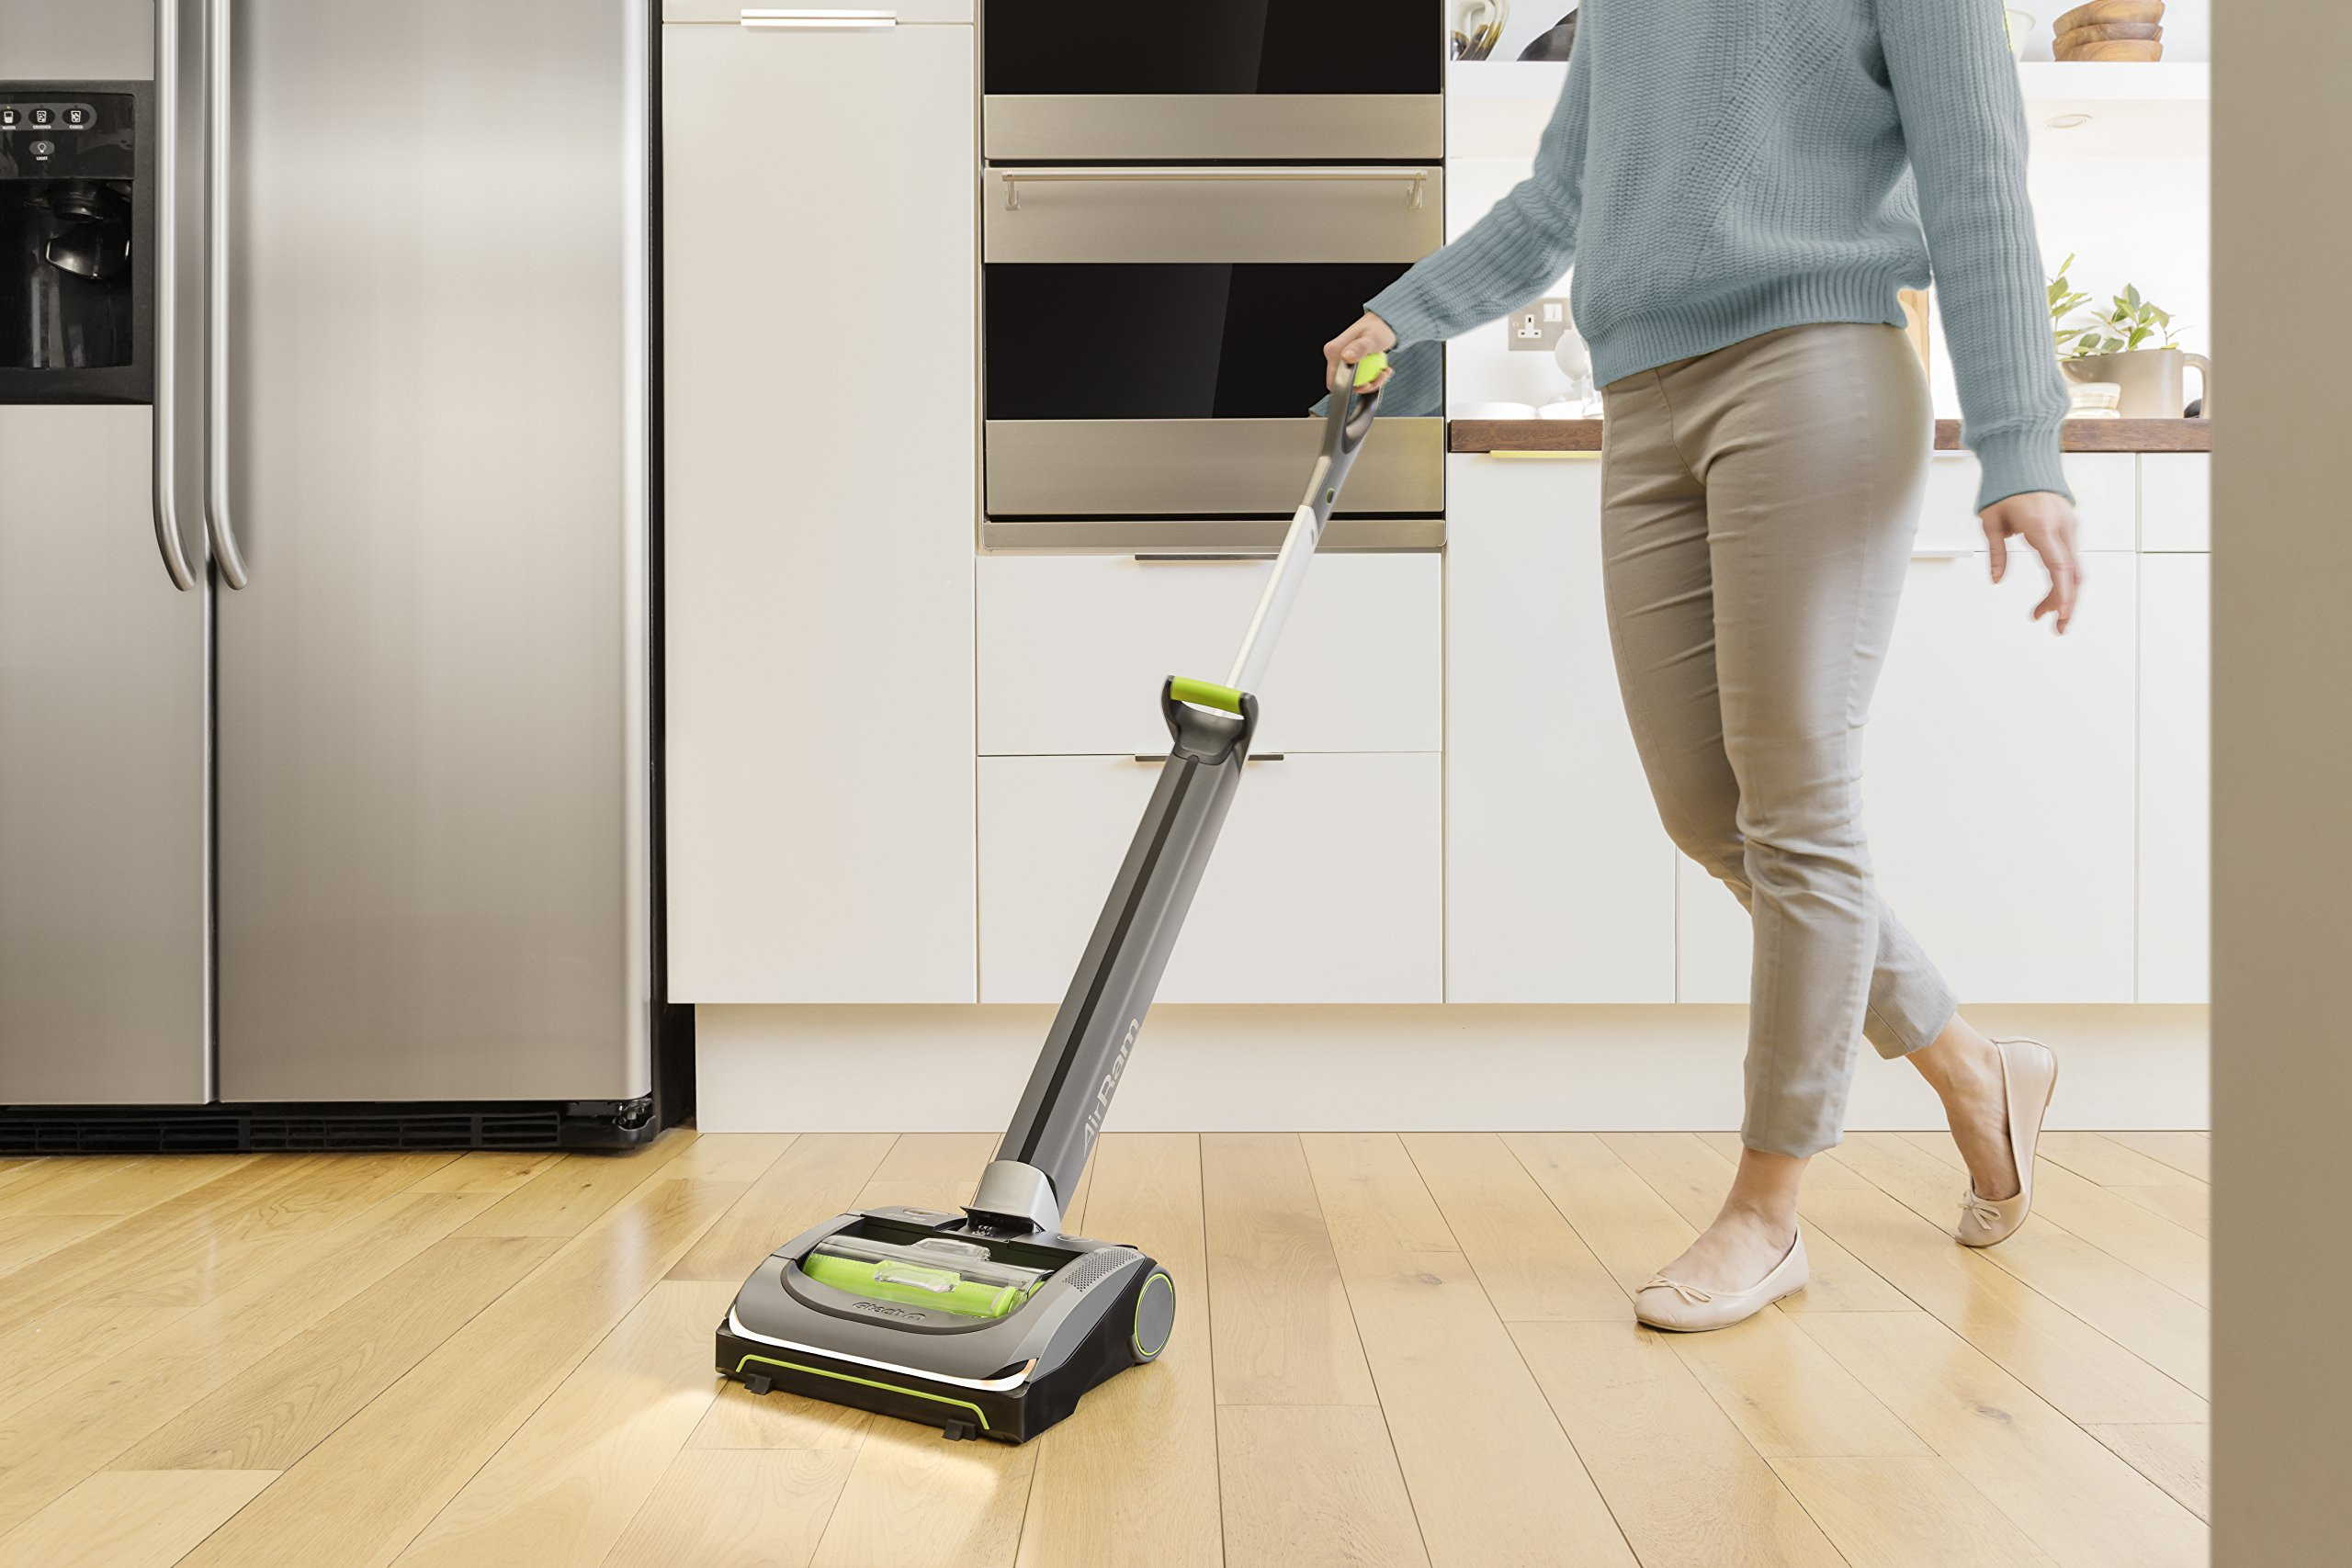 16 Great top Rated Hardwood Floor Steam Cleaner 2022 free download top rated hardwood floor steam cleaner of vacuum and floor care shop amazon uk inside vacuum cleaners